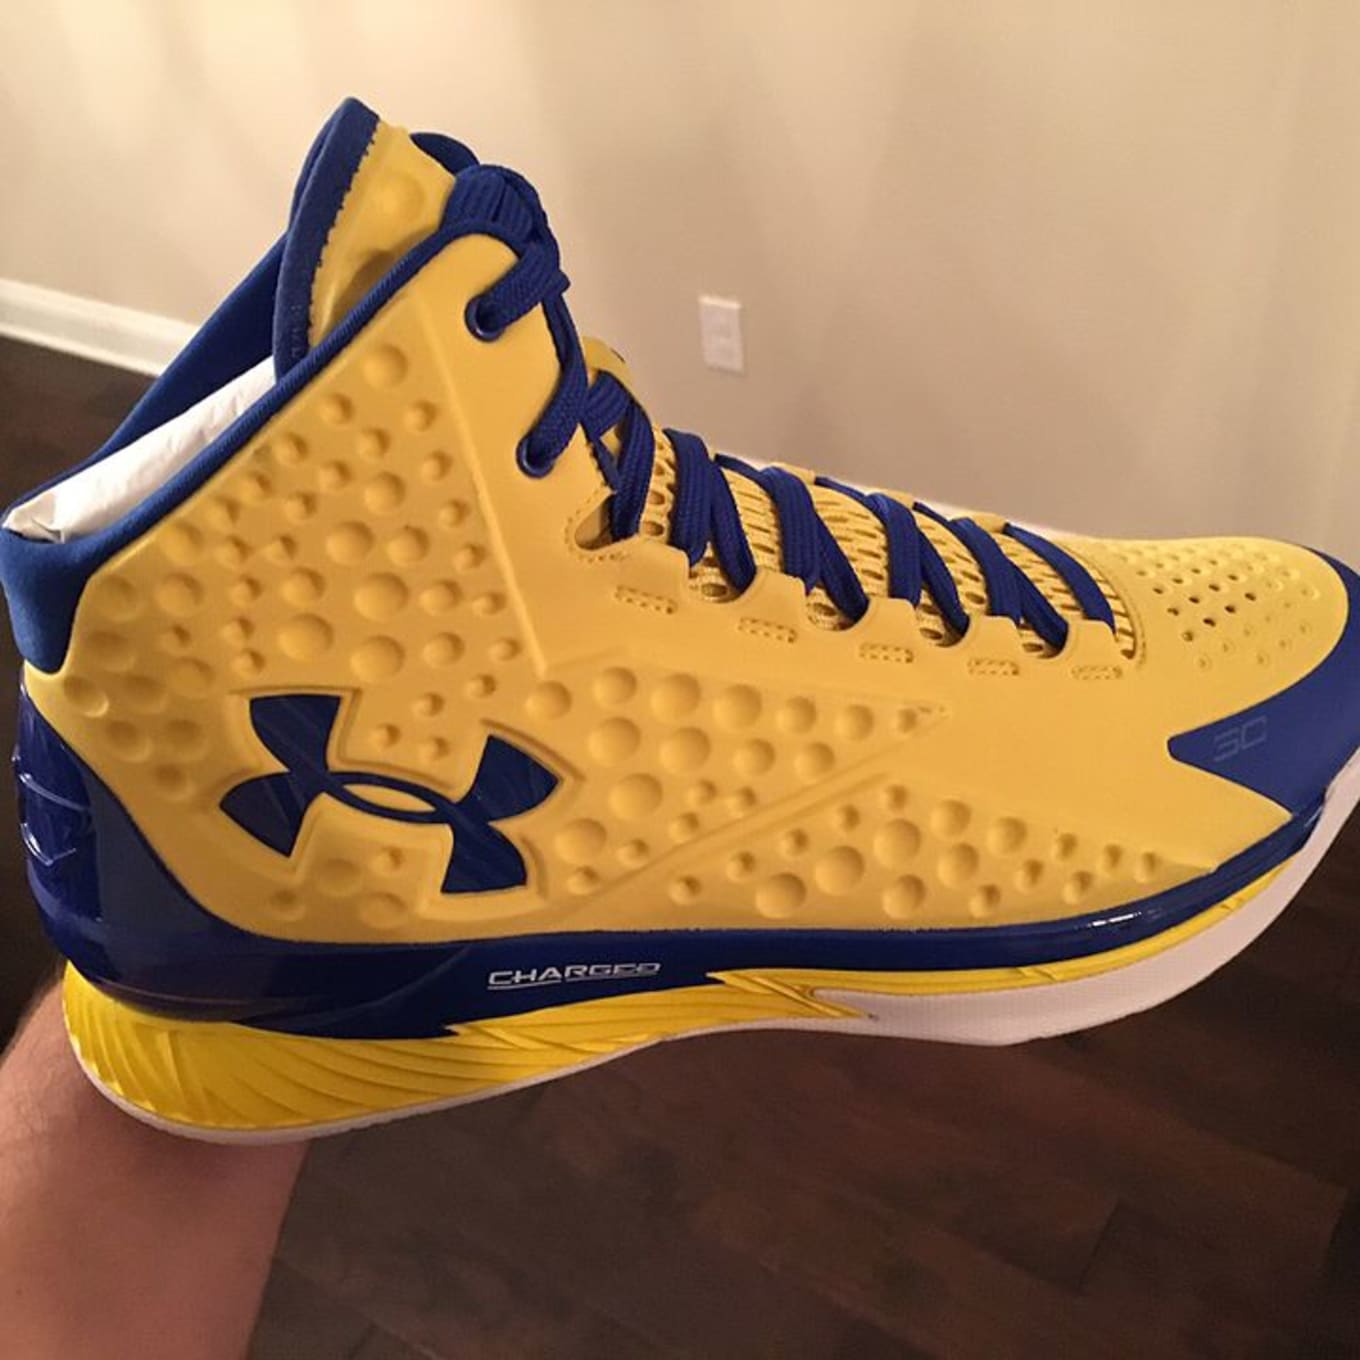 curry 1 icon